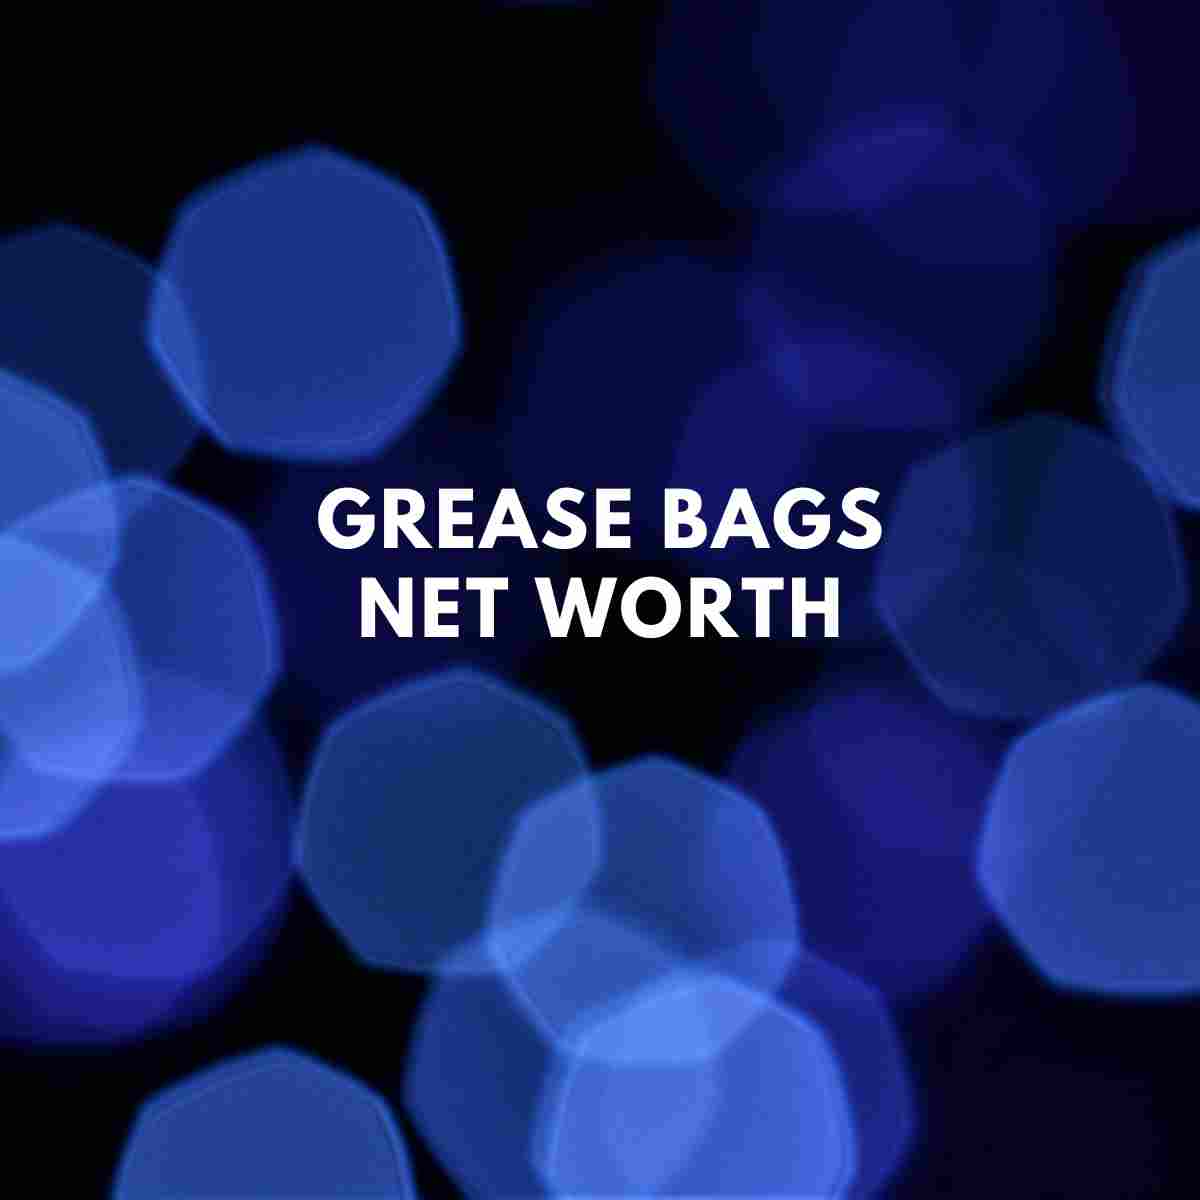 Grease Bags net worth